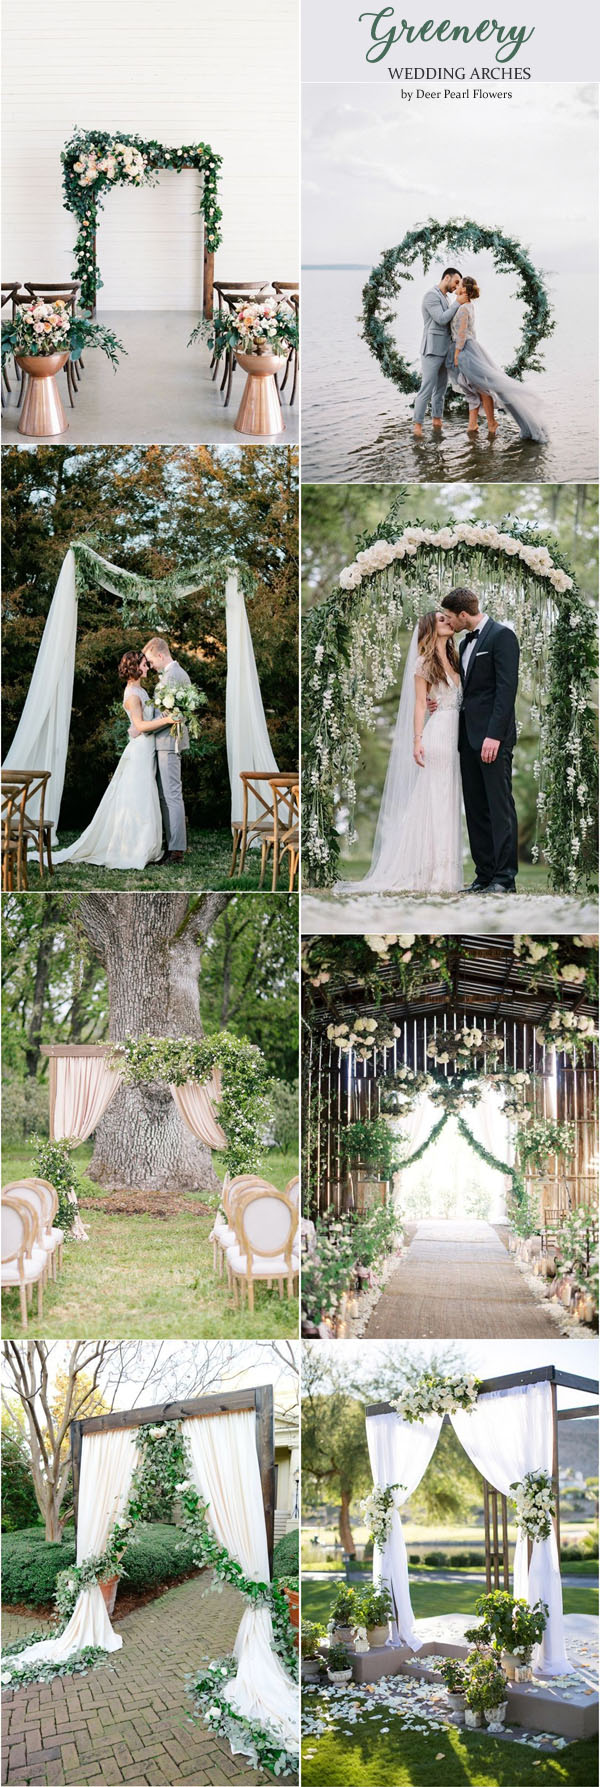 Greenery wedding arches alter for outdoor weddings